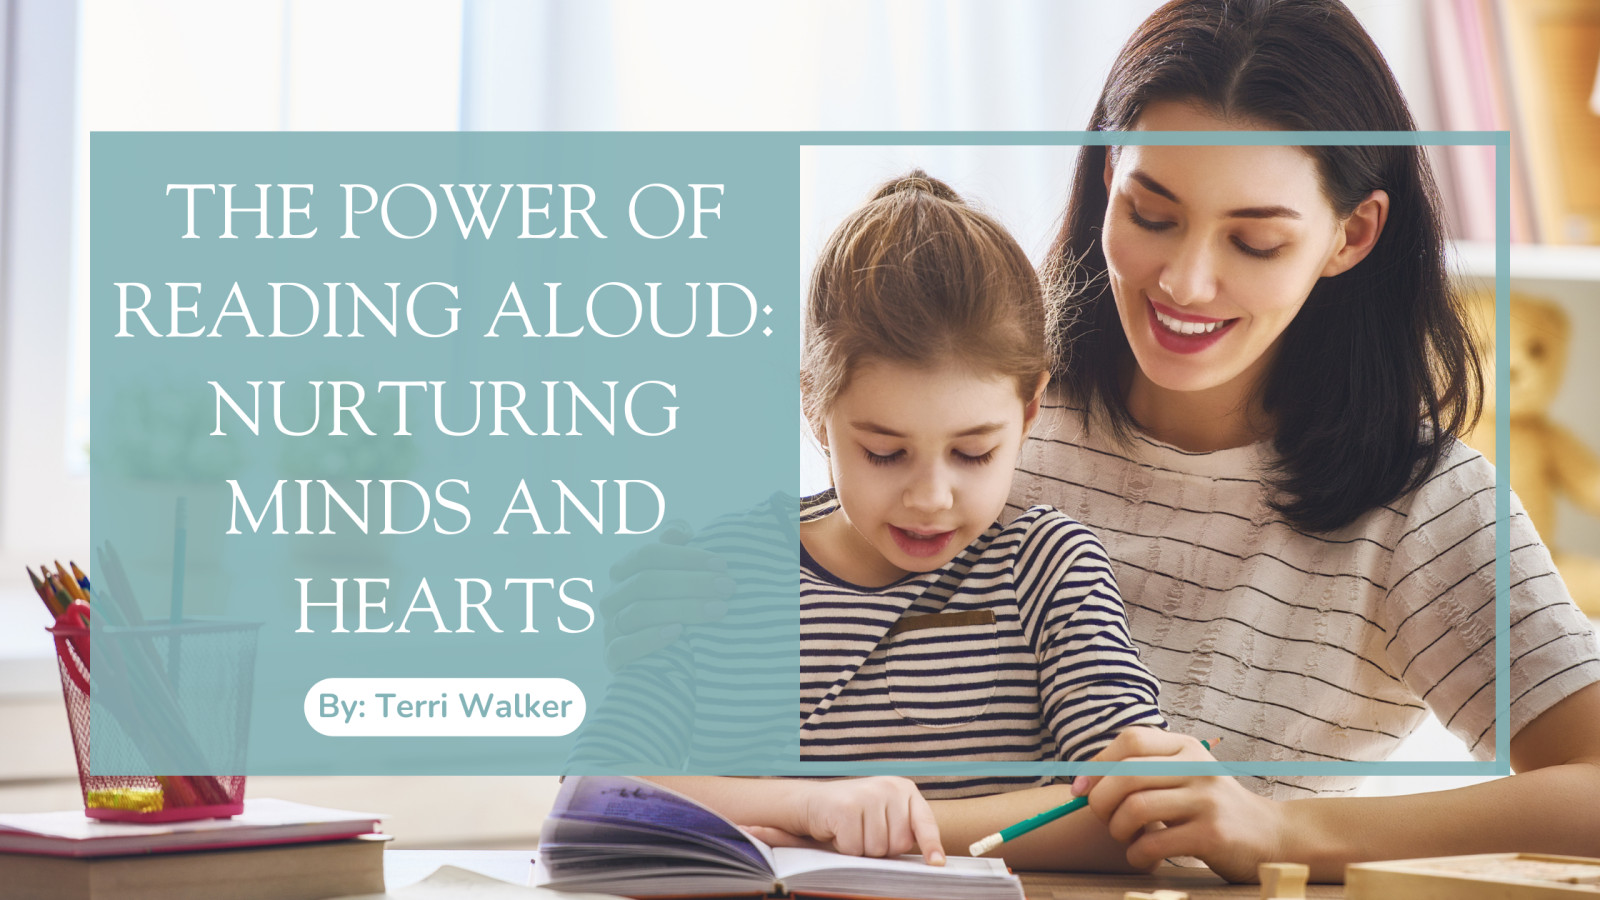 The Power of Reading Aloud: Nurturing Minds